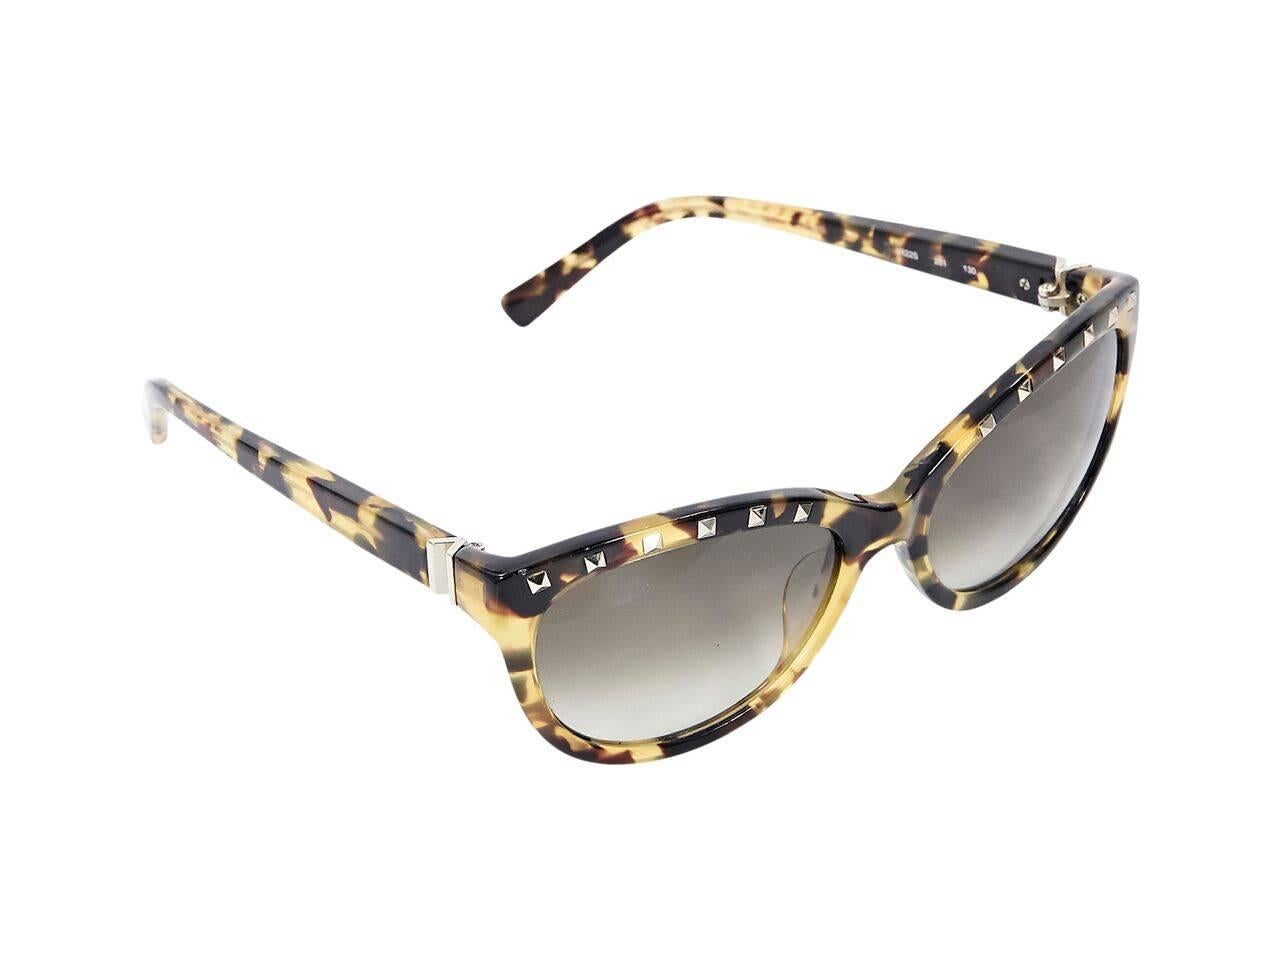 Product details:  Tortoiseshell sunglasses by Valentino.  Accented with pyramid studs.  Gradient lenses.  Goldtone hardware.
Condition: Pre-owned. Very good.
Est. Retail $ 398.00